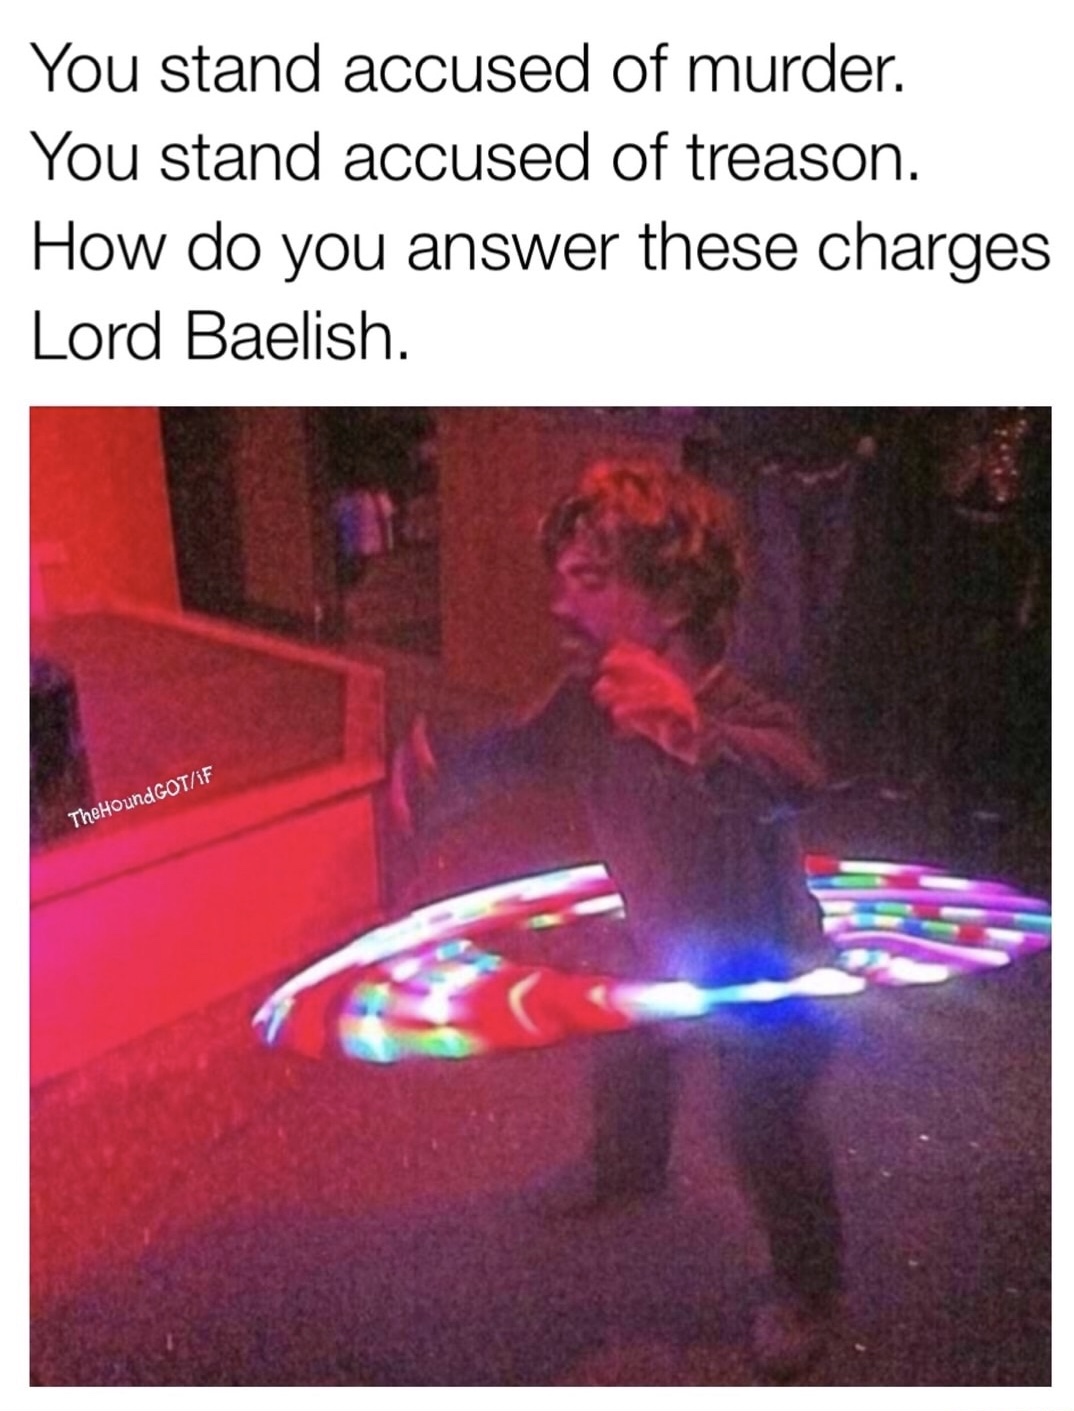 dank meme peter dinklage hula hoop - You stand accused of murder. You stand accused of treason. How do you answer these charges Lord Baelish. TheHoundGOTIf